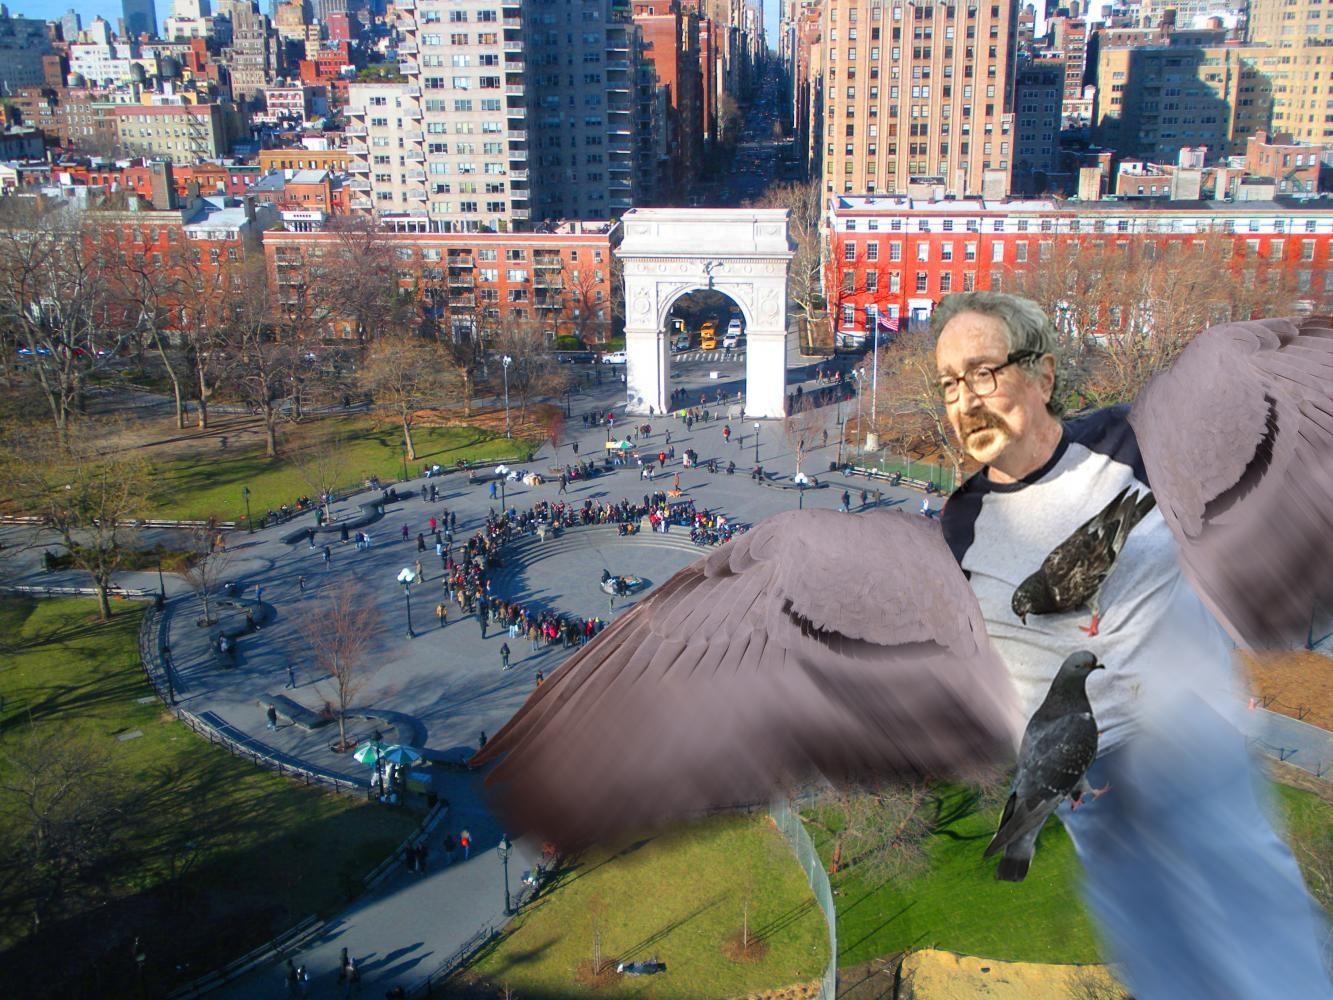 HUMOR: Pigeon Man Grants Final Wish Before Flying South For Winter